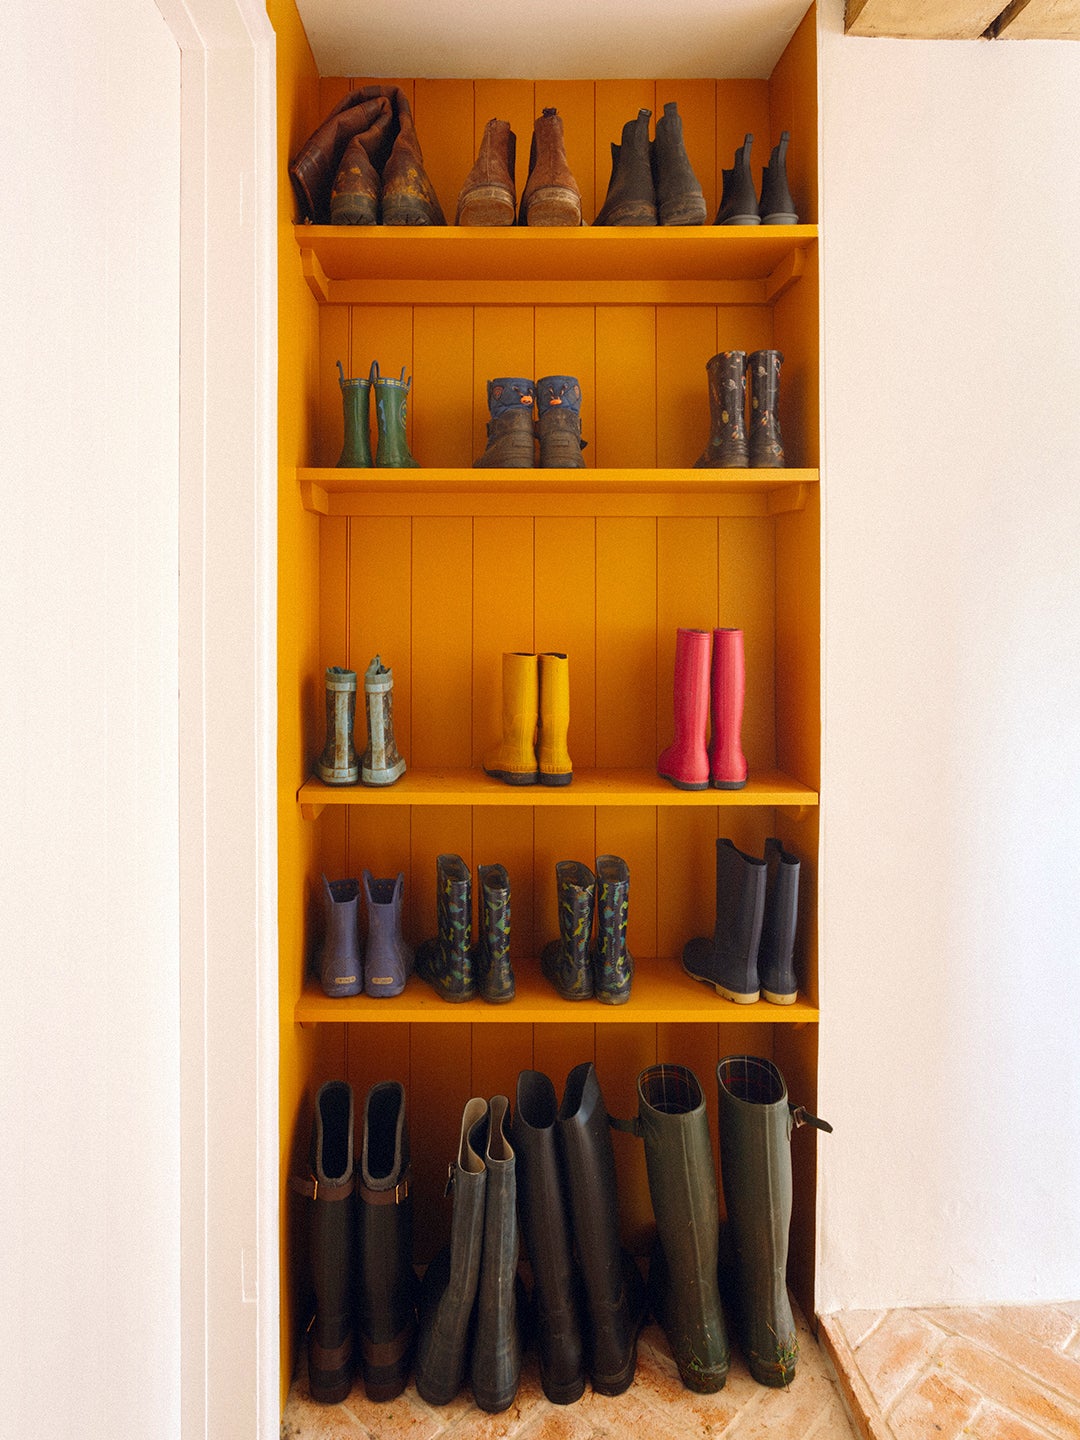 shoes on yellow shelves